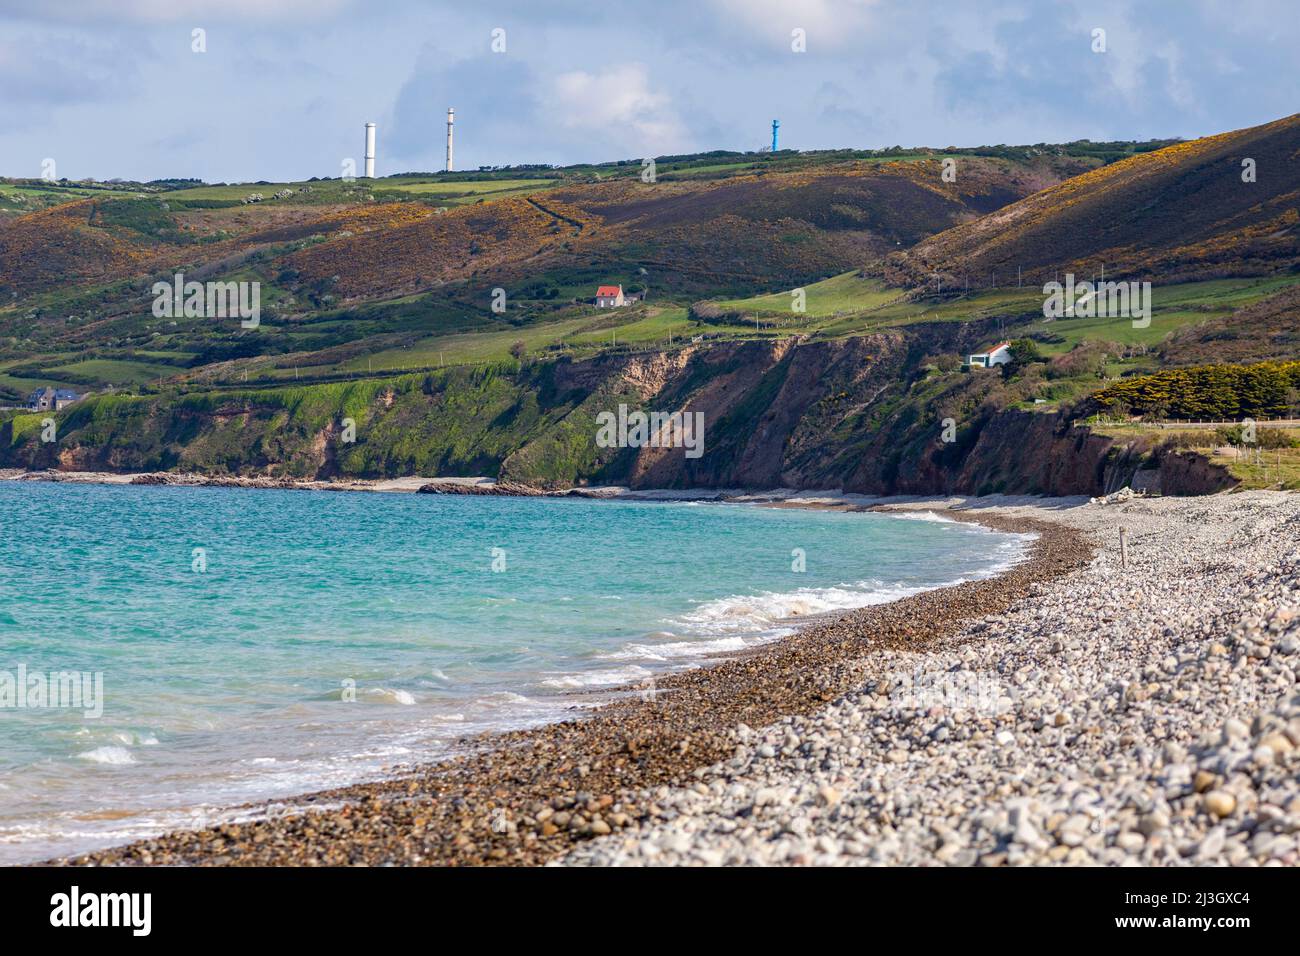 France, Manche, Cotentin, Cape Hague, Vauville, turquoise blue sea and Vauville cove beach, listed as a Natura 2000 site, crossed by the GR223 coastal path and La Hague Nuclear Fuel Reprocessing Plant in the background Stock Photo